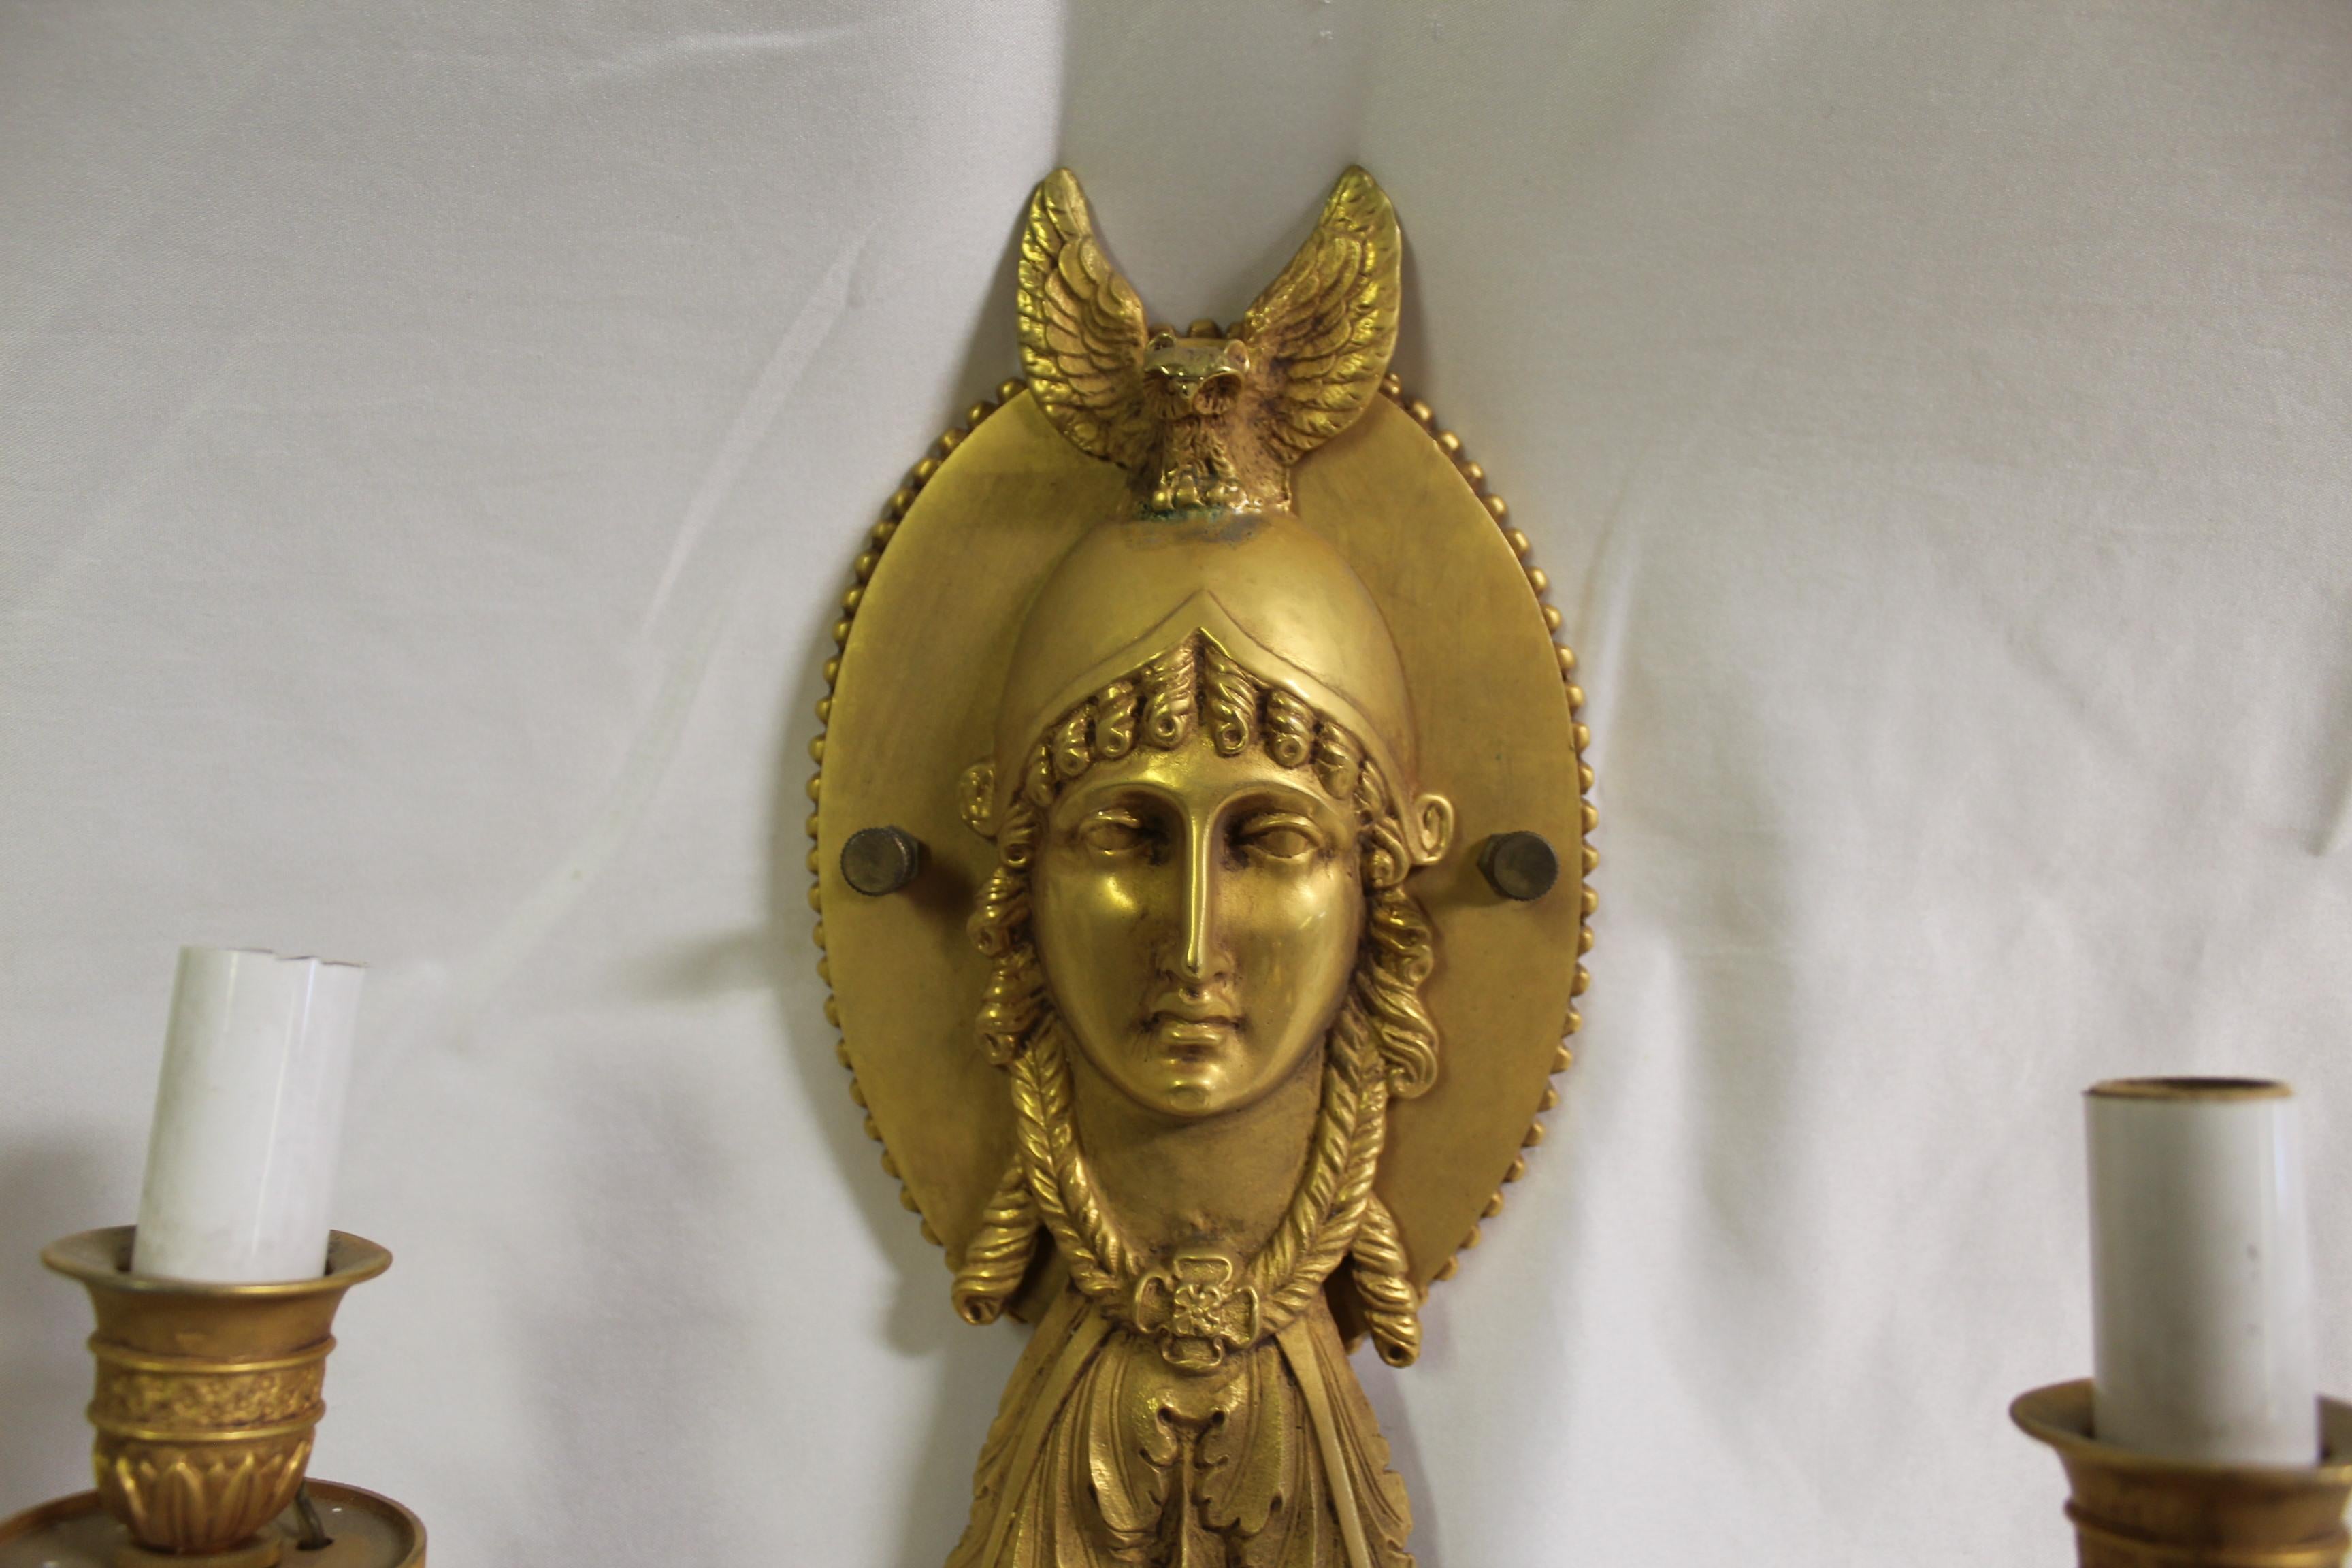 Hi-Quality bronze castings with an Antique Gold plated finish . They have 2